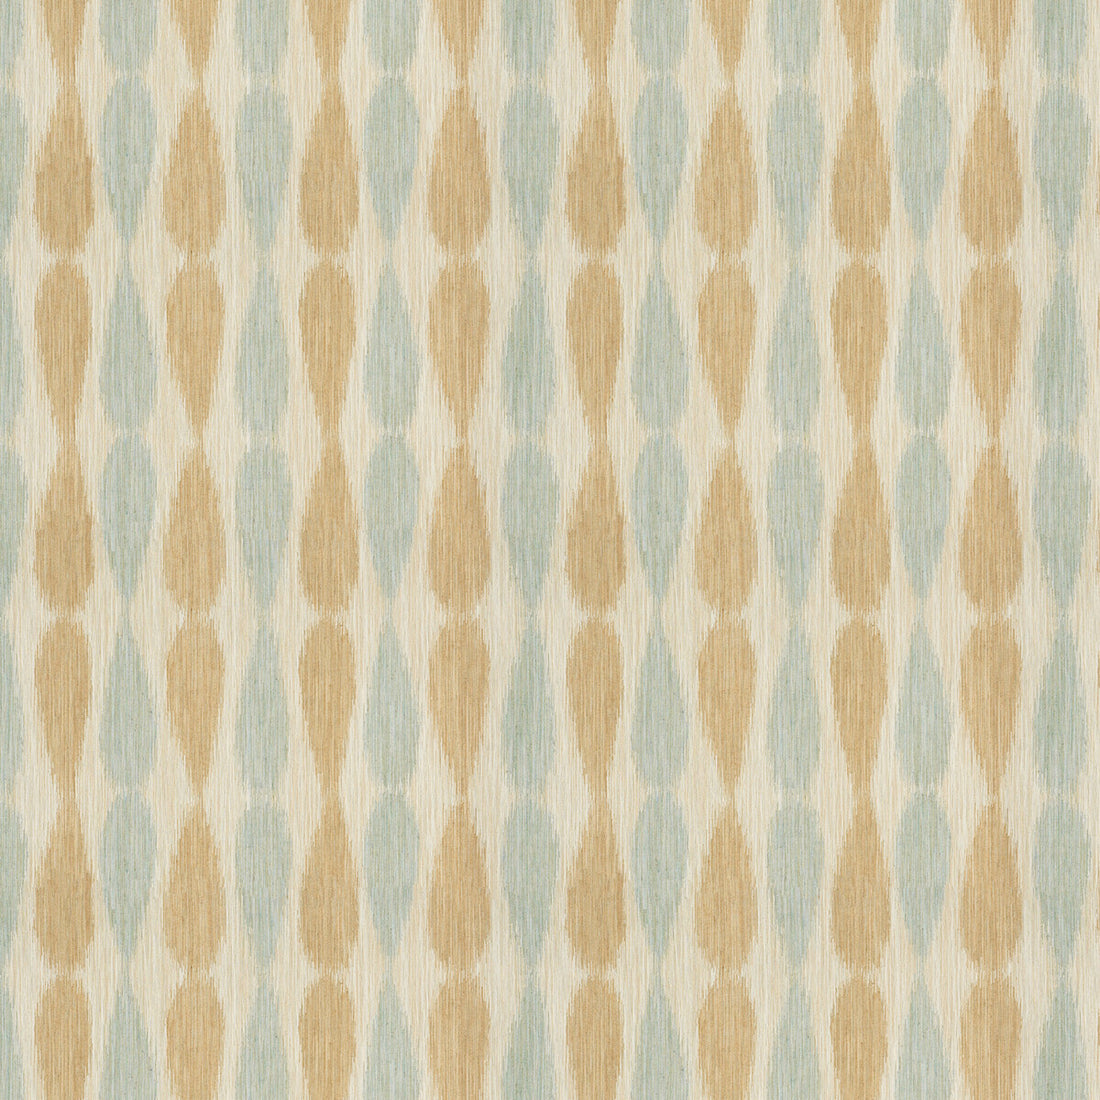 Ikat Drops fabric in aqua color - pattern GWF-2927.13.0 - by Lee Jofa Modern in the Allegra Hicks II collection